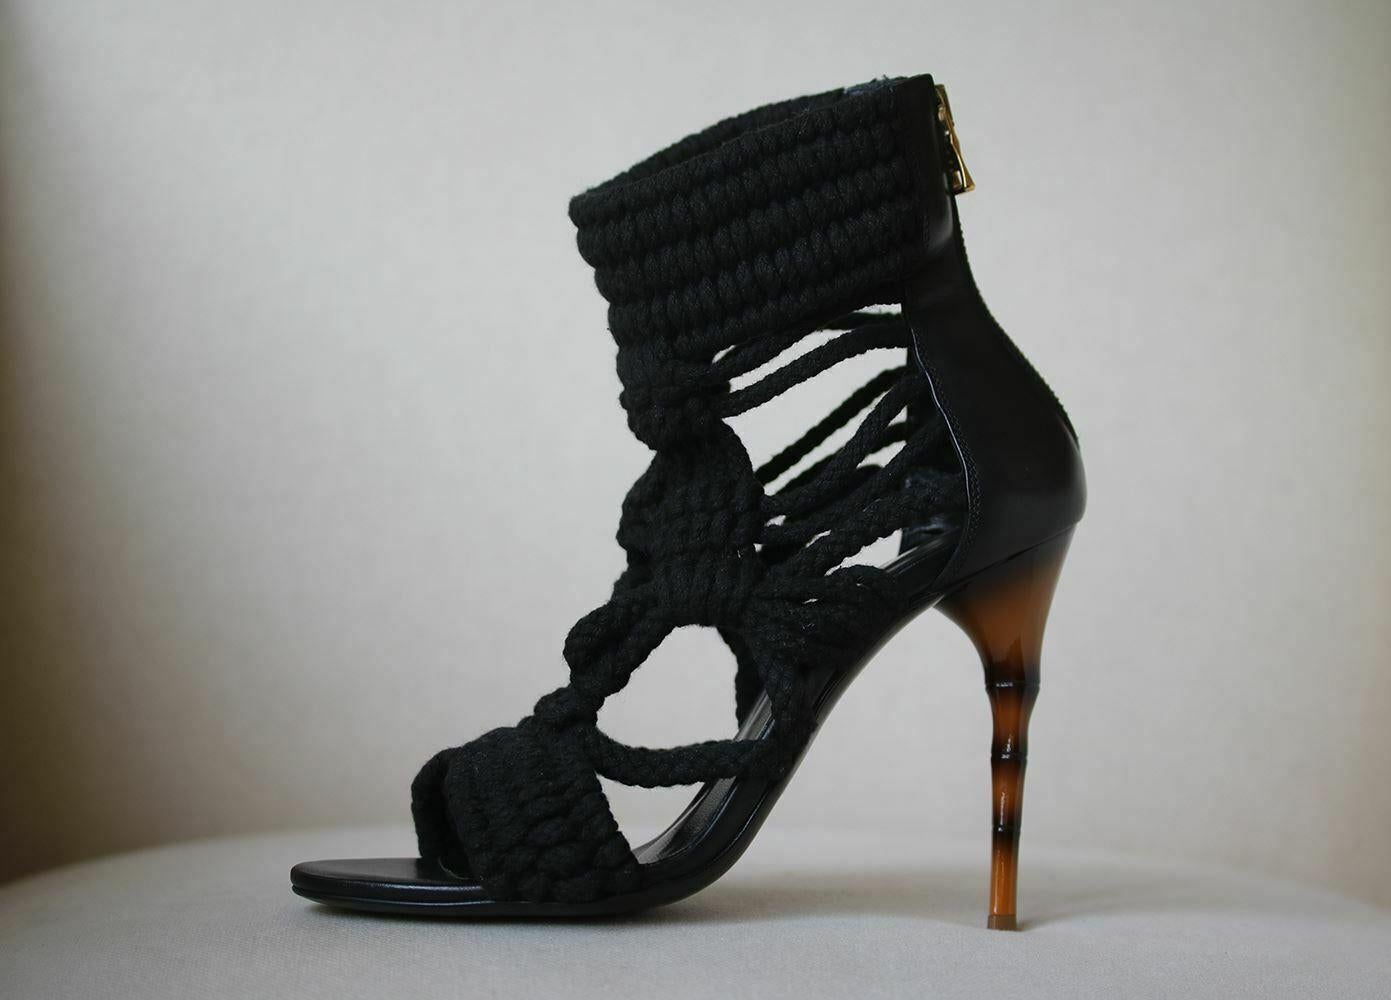 Black woven Balmain multistrap rope sandals with leather trim, resin heels and zip closures at counters. Heel measures approx. 4.25 inches. 

Size: EU 38 (UK 5, US 8)

Condition: Worn once. Slightest wear to the soles; see pictures. Otherwise, no